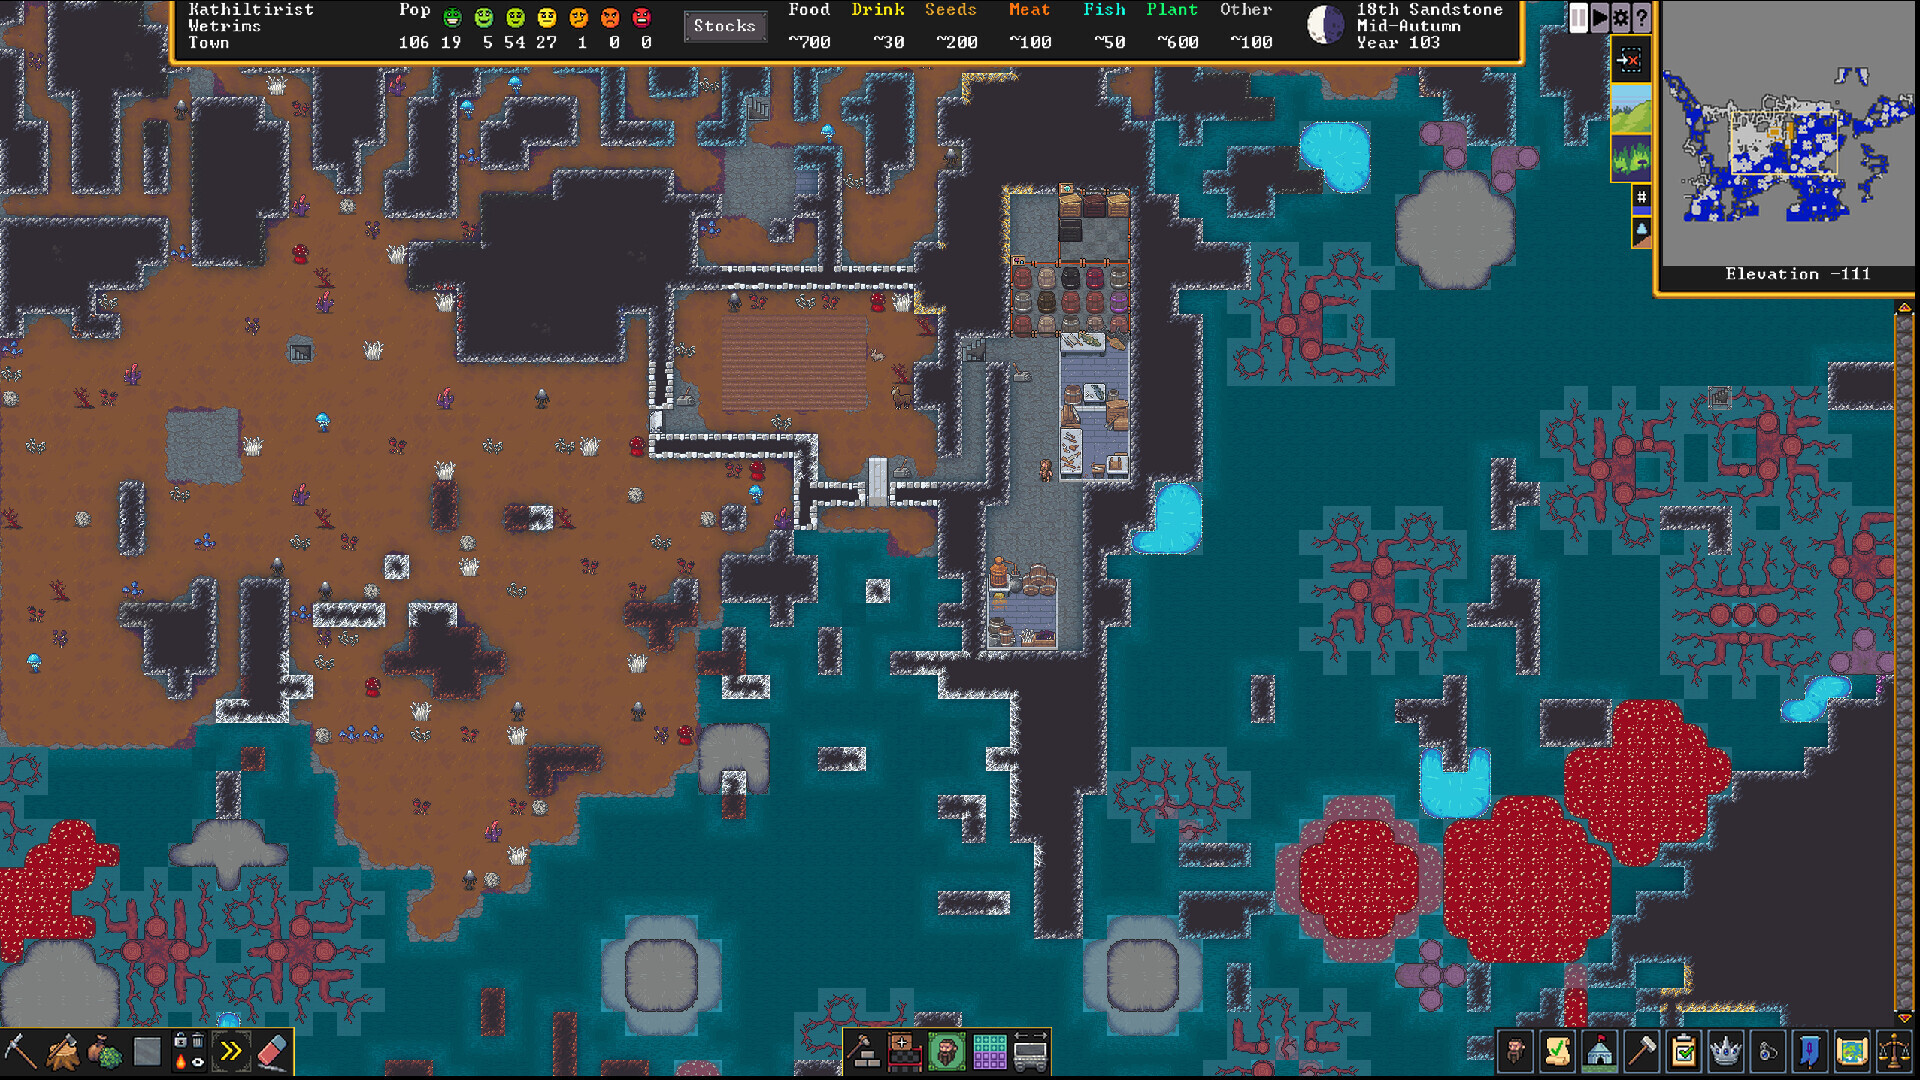 The Legendary Dwarf Fortress Gets a Whole New Look on December 6th